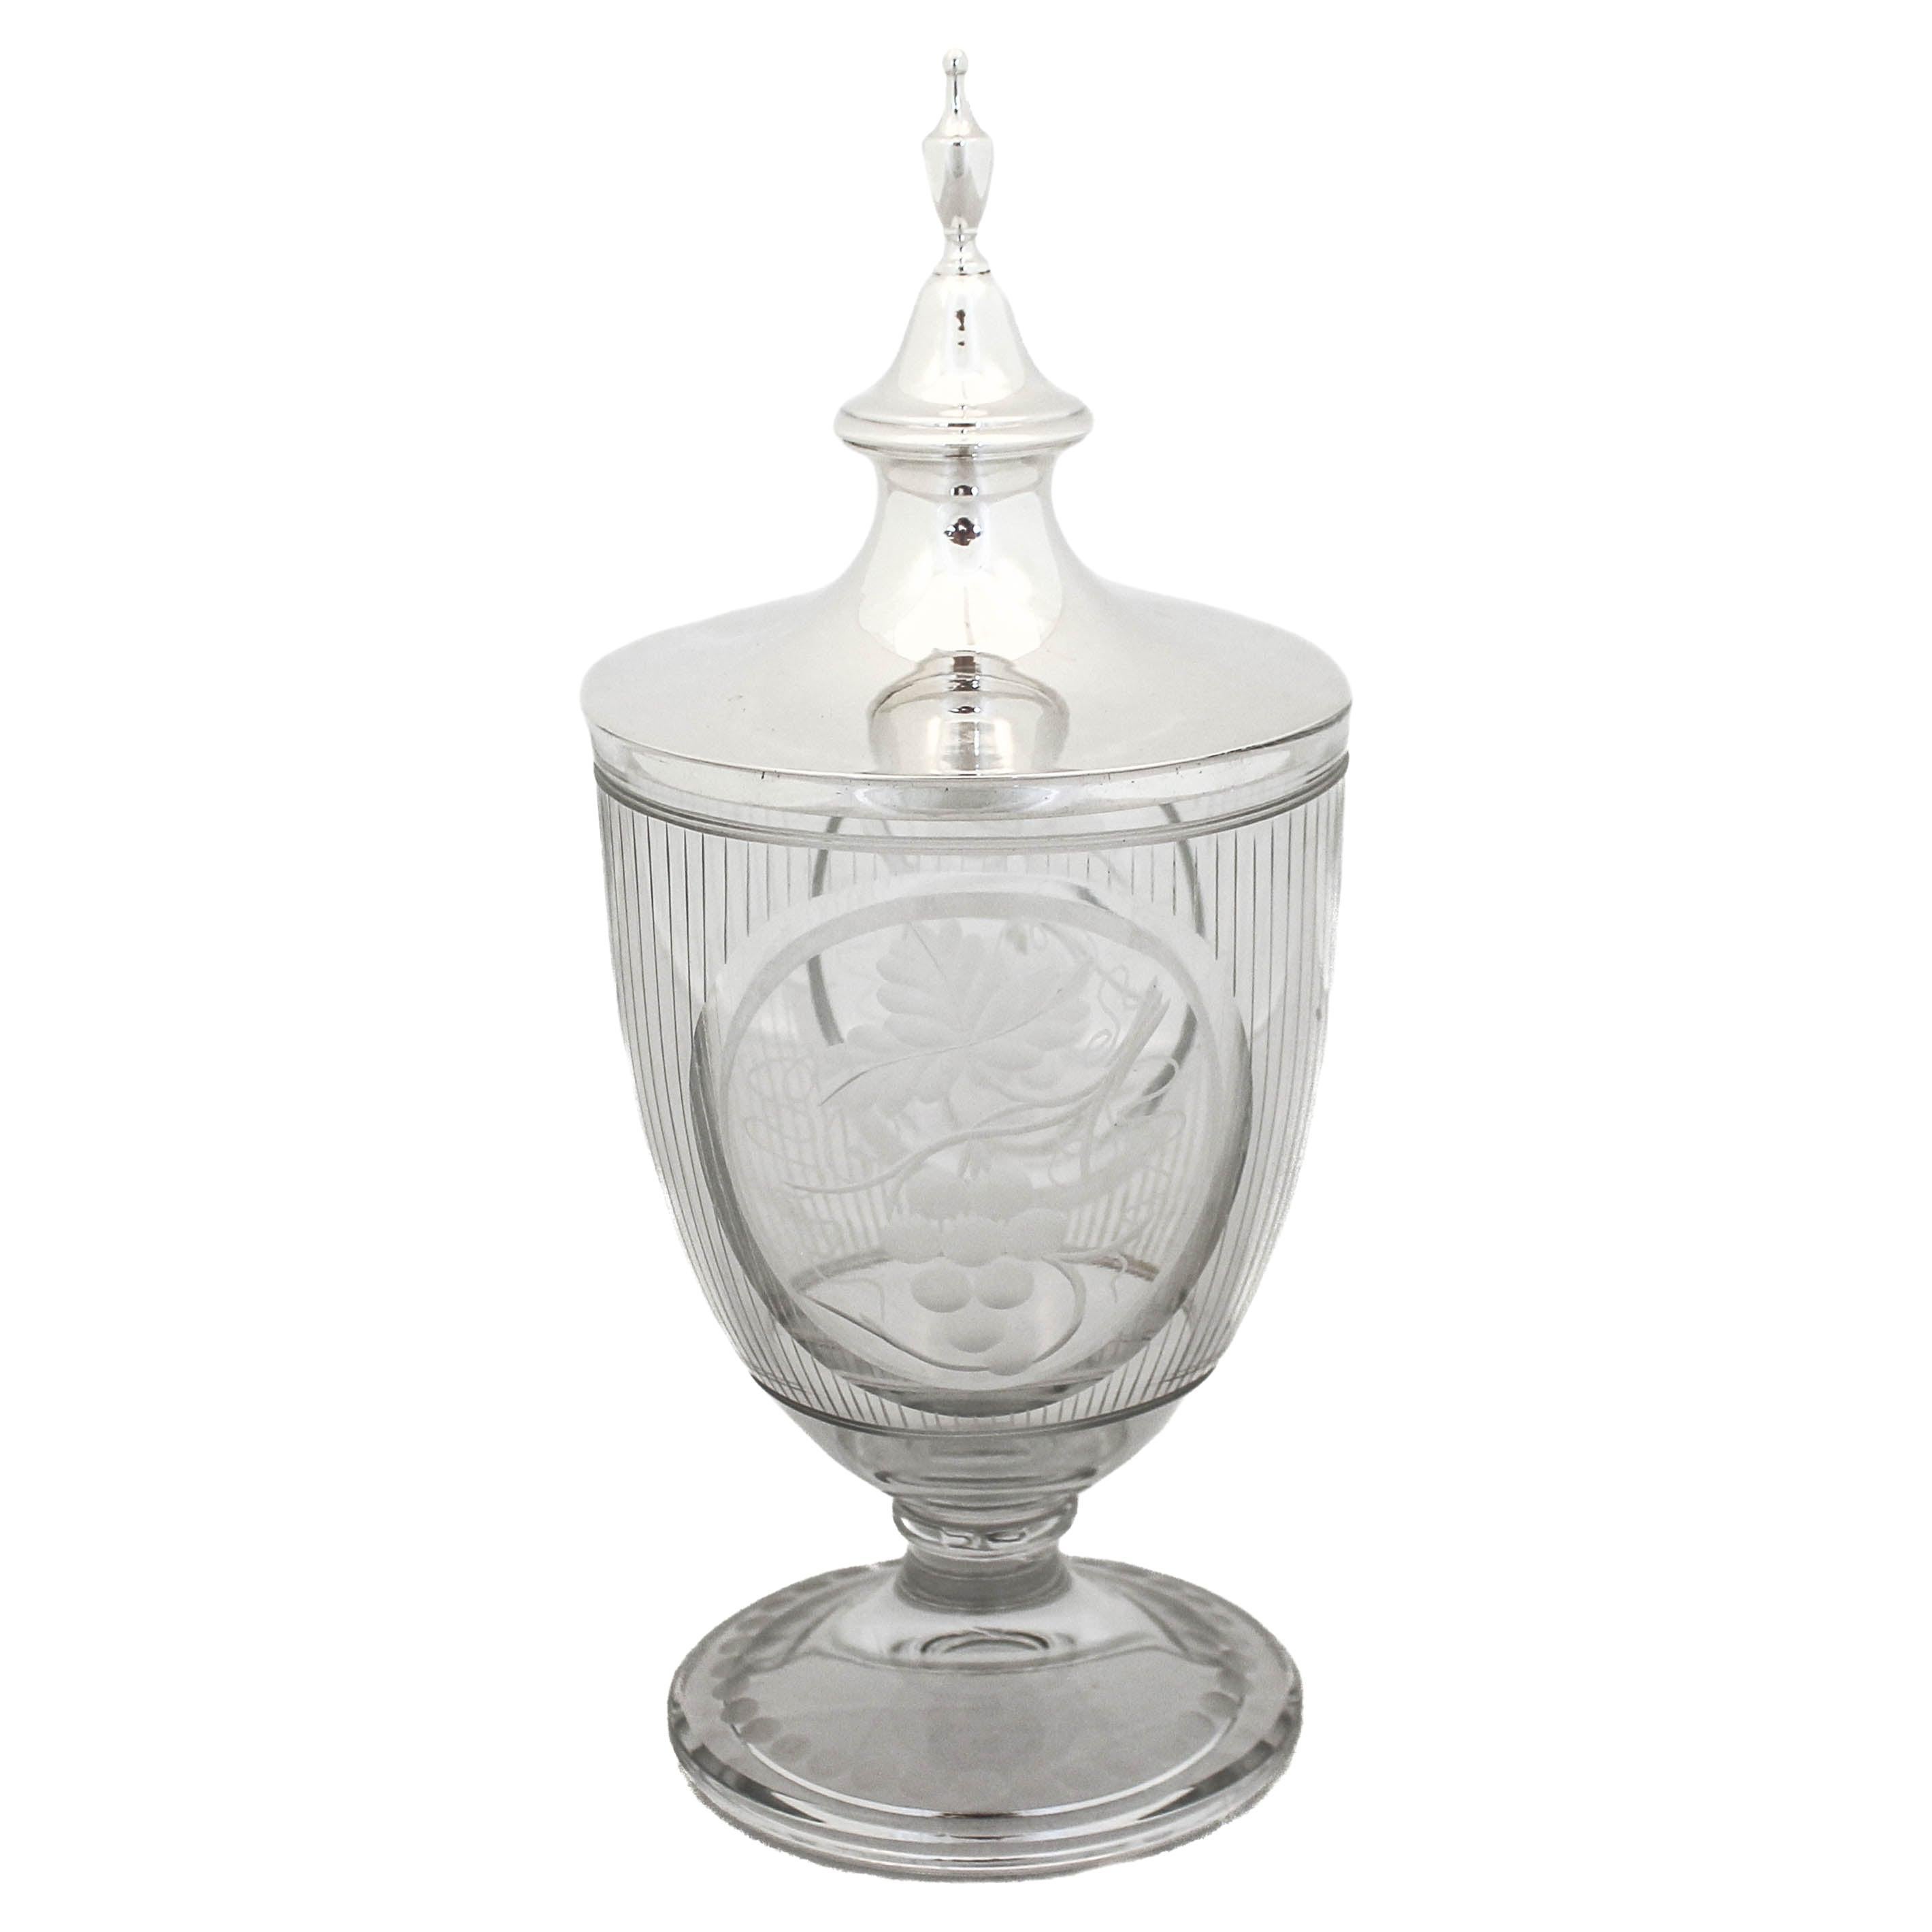 International Silver Vases and Vessels